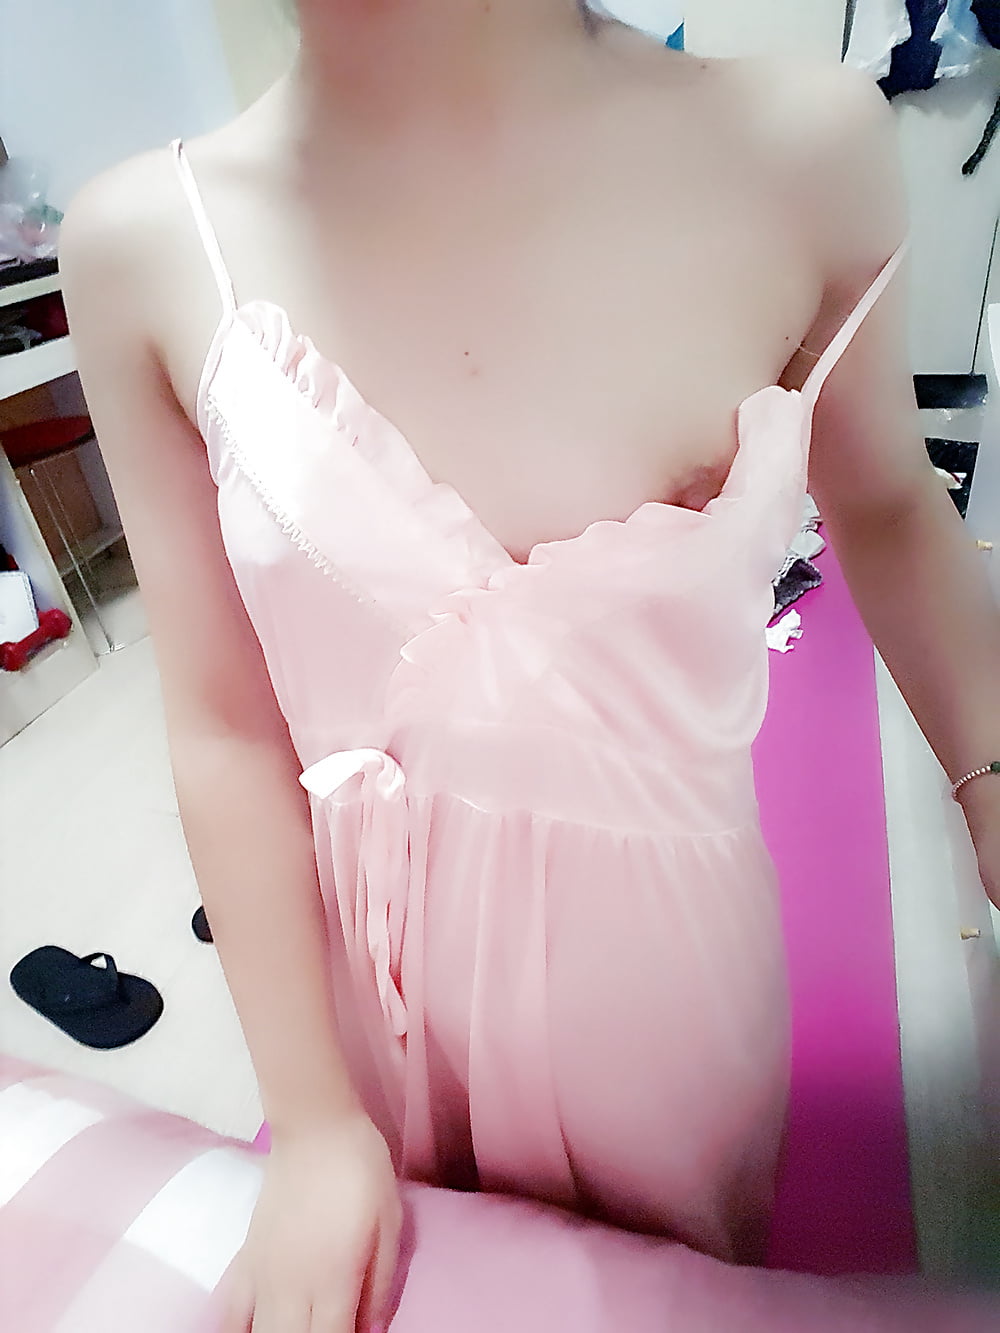 Cute chinese college girl part 2 adult photos